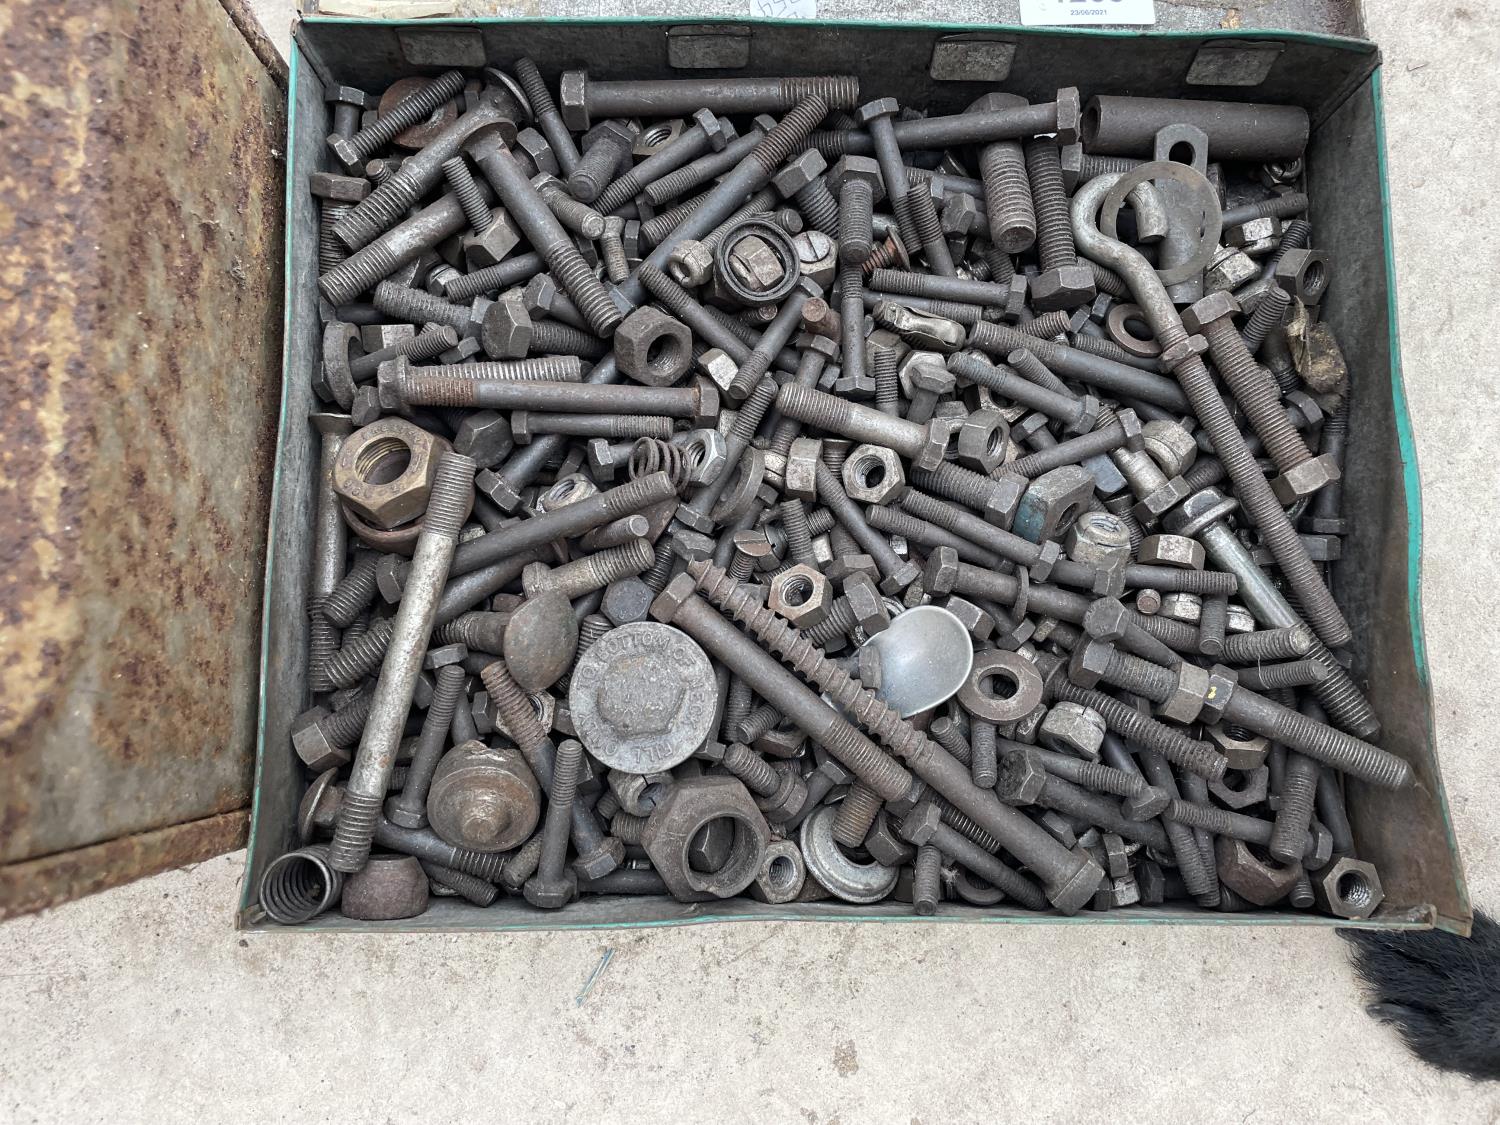 A LARGE ASSORTMENT OF NUTS AND BOLTS AND OTHER HARDWARE ITEMS - Image 3 of 4